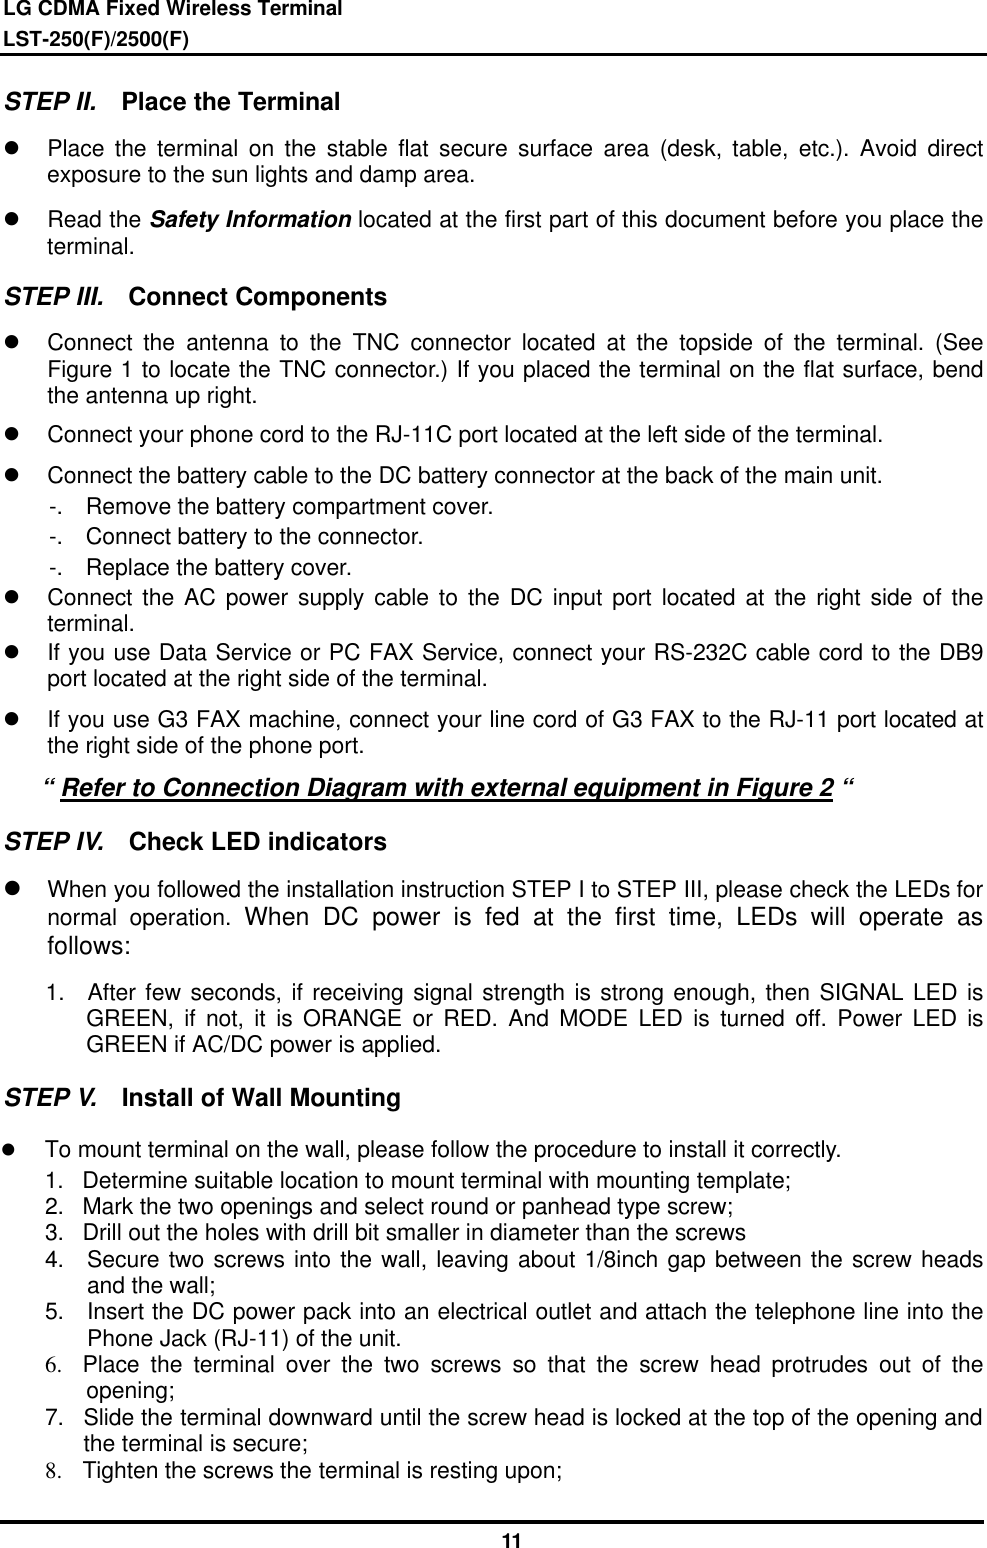 LG CDMA Fixed Wireless Terminal LST-250(F)/2500(F)              11 STEP II.  Place the Terminal l Place the terminal on the stable flat secure surface area (desk, table, etc.). Avoid direct exposure to the sun lights and damp area.   l Read the Safety Information located at the first part of this document before you place the terminal. STEP III.  Connect Components l Connect the antenna to the TNC connector located at the topside of the terminal. (See Figure 1 to locate the TNC connector.) If you placed the terminal on the flat surface, bend the antenna up right.   l Connect your phone cord to the RJ-11C port located at the left side of the terminal. l Connect the battery cable to the DC battery connector at the back of the main unit.     -.  Remove the battery compartment cover.     -.  Connect battery to the connector.     -.  Replace the battery cover. l Connect the AC power supply cable to the DC input port located at the right side of the terminal. l If you use Data Service or PC FAX Service, connect your RS-232C cable cord to the DB9 port located at the right side of the terminal. l If you use G3 FAX machine, connect your line cord of G3 FAX to the RJ-11 port located at the right side of the phone port.    “ Refer to Connection Diagram with external equipment in Figure 2 “ STEP IV.  Check LED indicators l When you followed the installation instruction STEP I to STEP III, please check the LEDs for normal operation. When DC power is fed at the first time, LEDs will operate as follows: 1.  After few seconds, if receiving signal strength is strong enough, then SIGNAL LED is GREEN, if not, it is ORANGE or RED. And MODE LED is turned off. Power LED is GREEN if AC/DC power is applied. STEP V.  Install of Wall Mounting   l  To mount terminal on the wall, please follow the procedure to install it correctly. 1. Determine suitable location to mount terminal with mounting template; 2. Mark the two openings and select round or panhead type screw; 3. Drill out the holes with drill bit smaller in diameter than the screws   4. Secure two screws into the wall, leaving about 1/8inch gap between the screw heads and the wall; 5. Insert the DC power pack into an electrical outlet and attach the telephone line into the Phone Jack (RJ-11) of the unit. 6.  Place the terminal over the two screws so that the screw head protrudes out of the  opening; 7. Slide the terminal downward until the screw head is locked at the top of the opening and the terminal is secure; 8.  Tighten the screws the terminal is resting upon; 